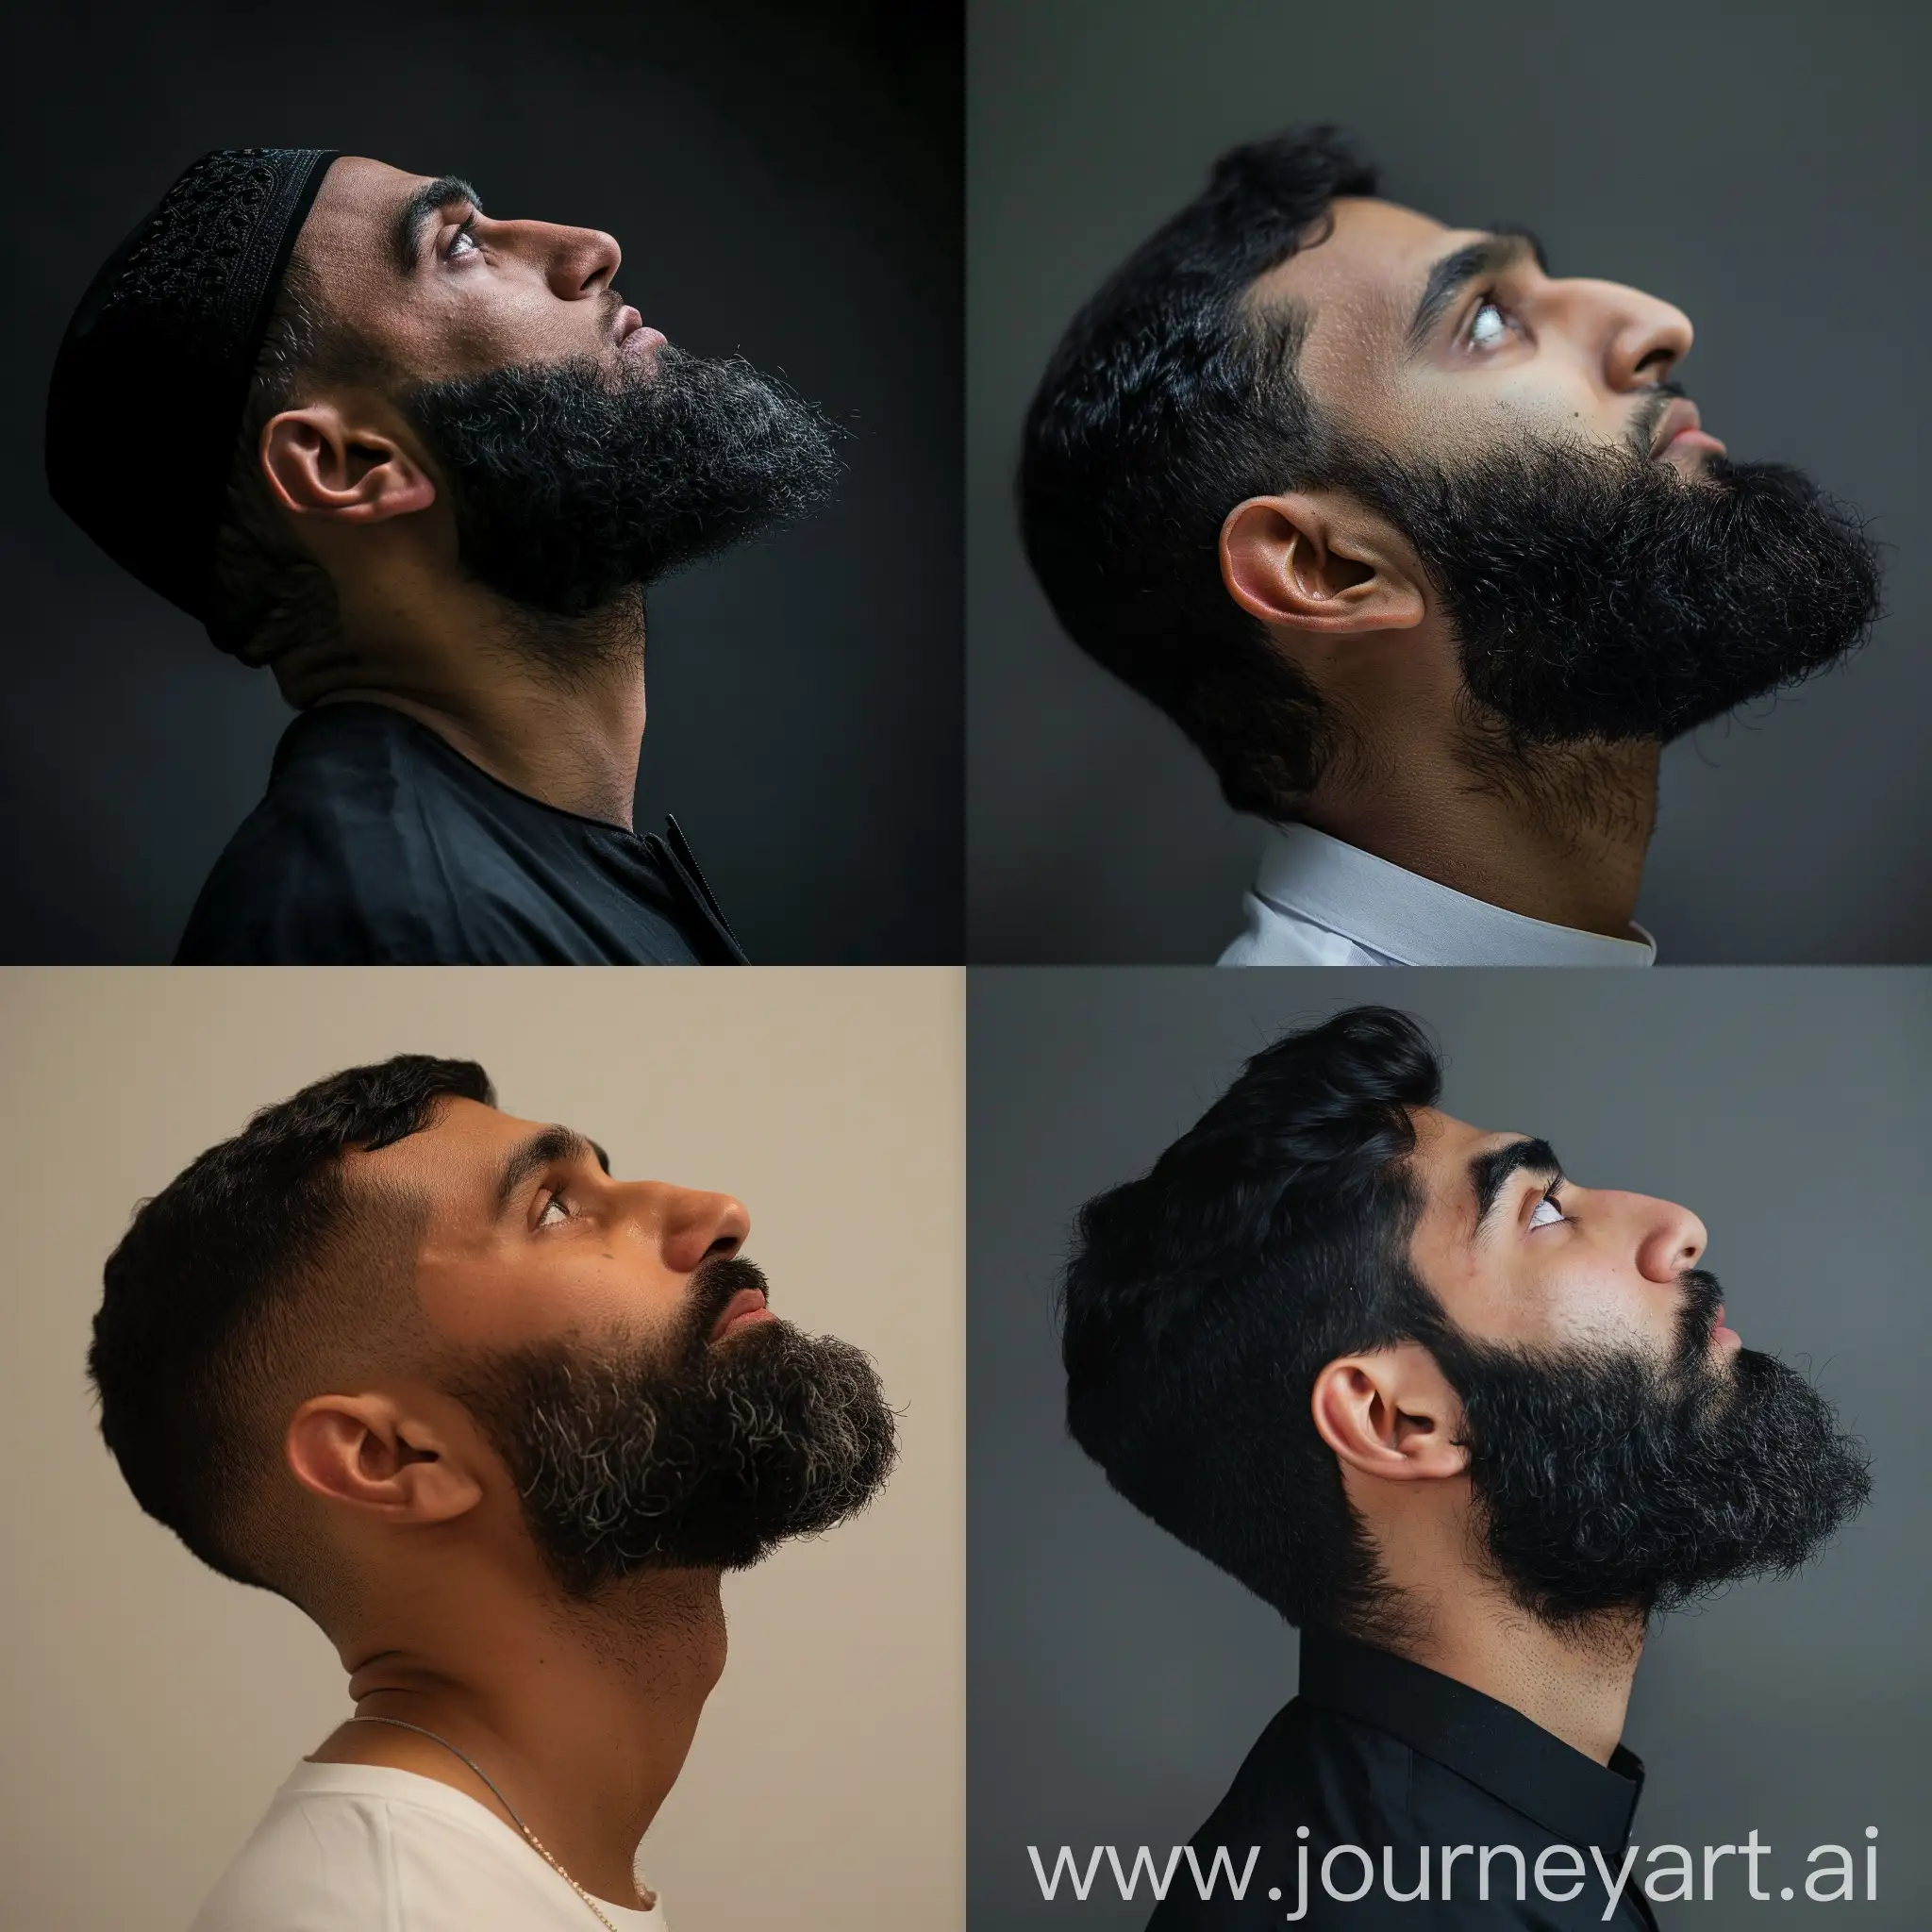 Muslim man with a beard looking up in side profile